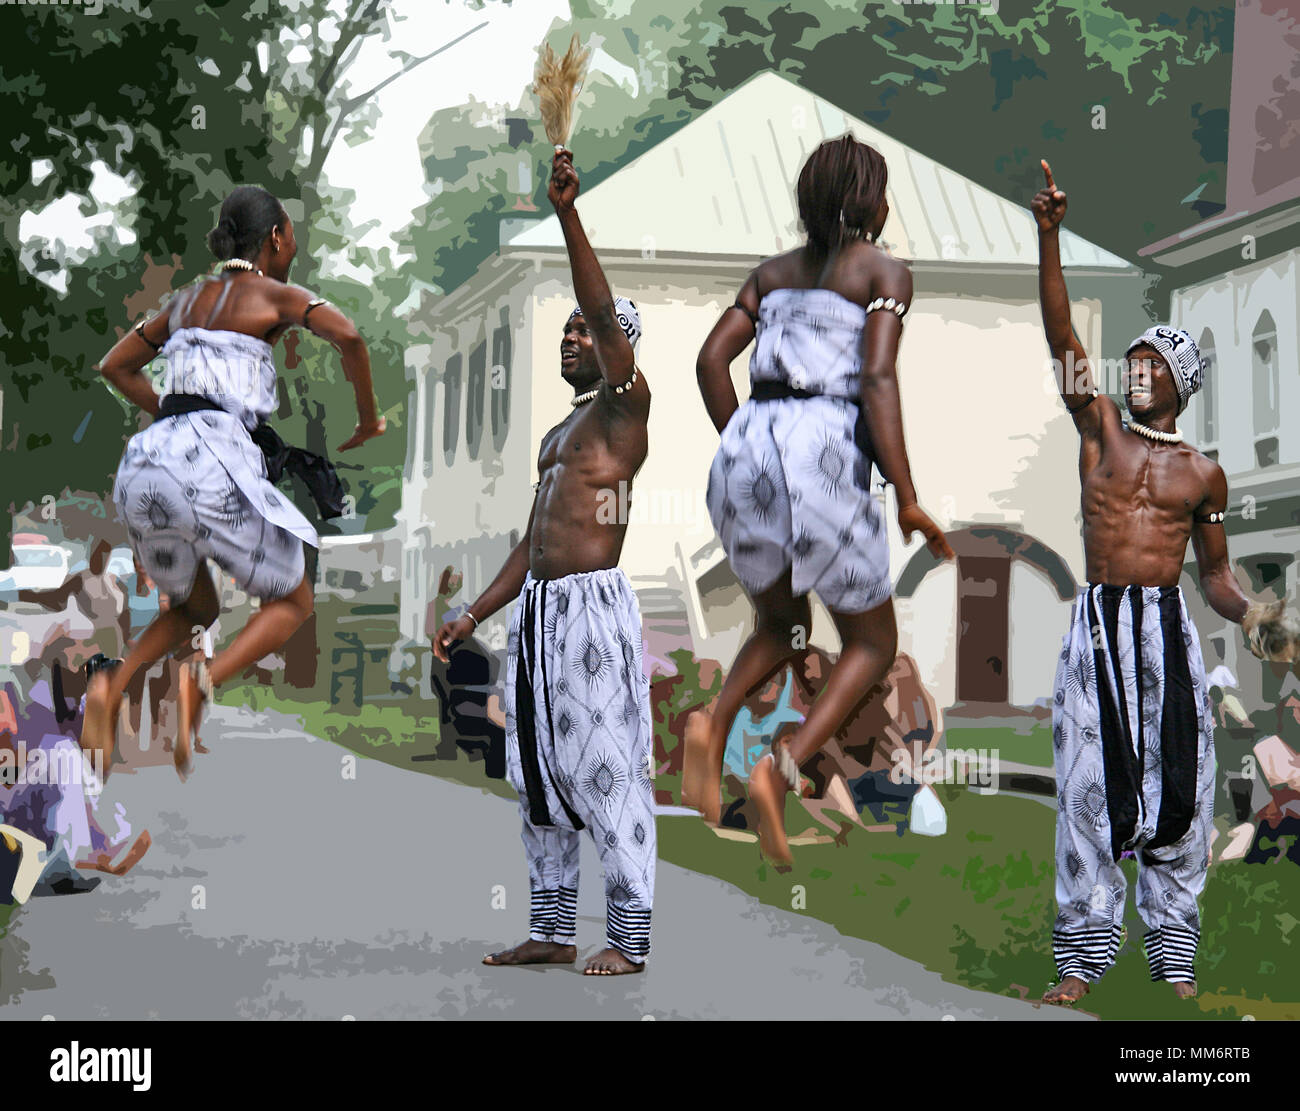 Kusa Dance and Music Ensemble from Ghana performing in Berkeley Springs, West Virginia in 2005. Photoshop manipulated background. Stock Photo